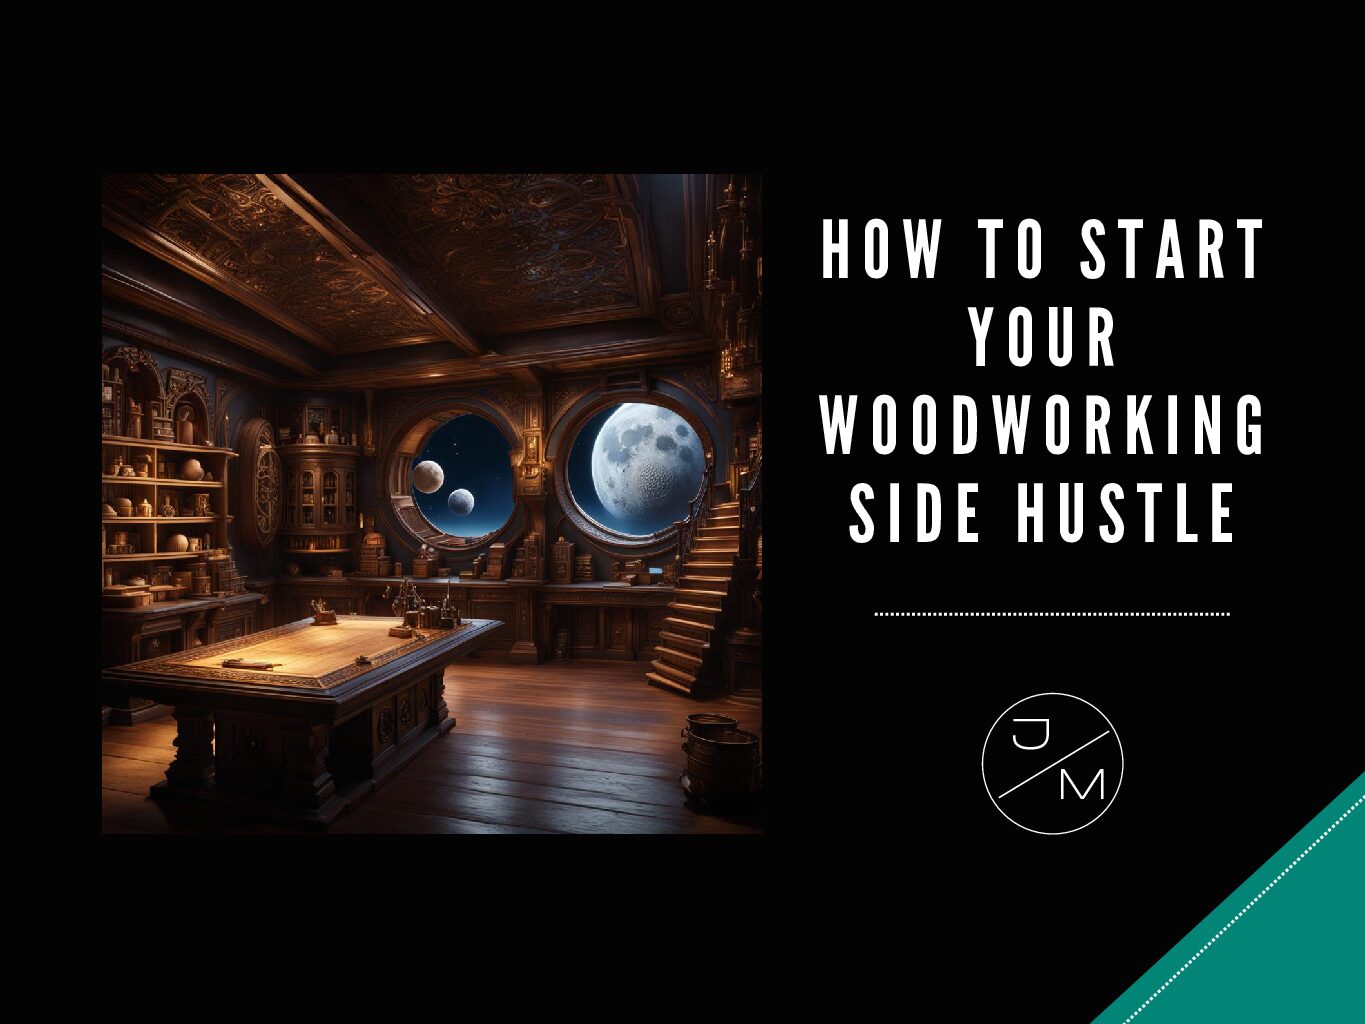 Woodworking Hobby? Turn your projects into a side hustle